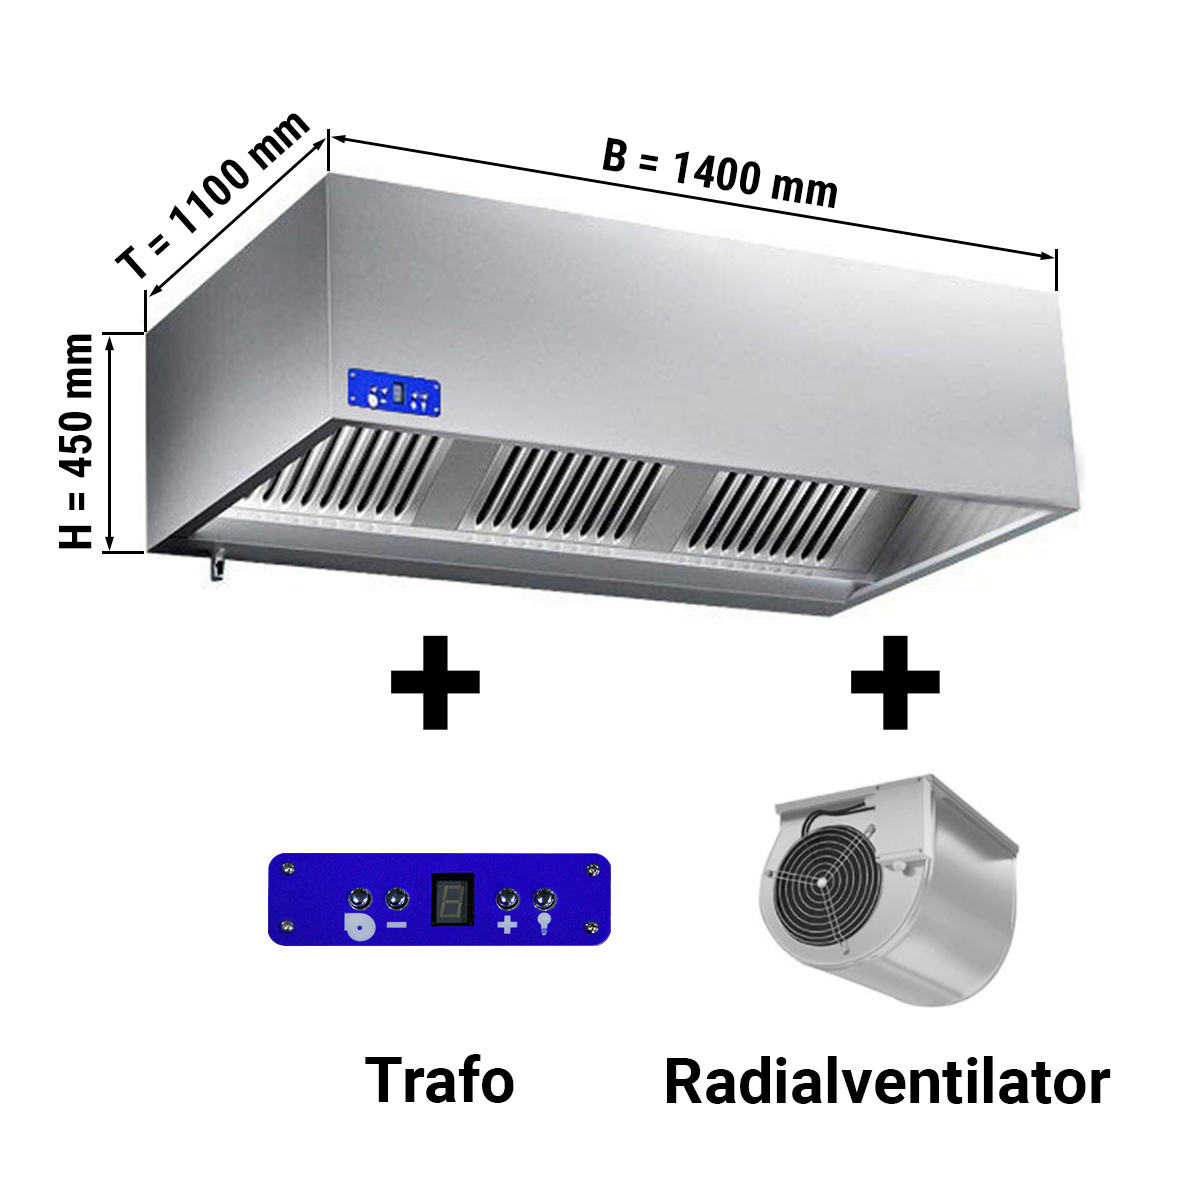 Ventilation hood with motor, controller, filter and lamp 1400X1100X450MM